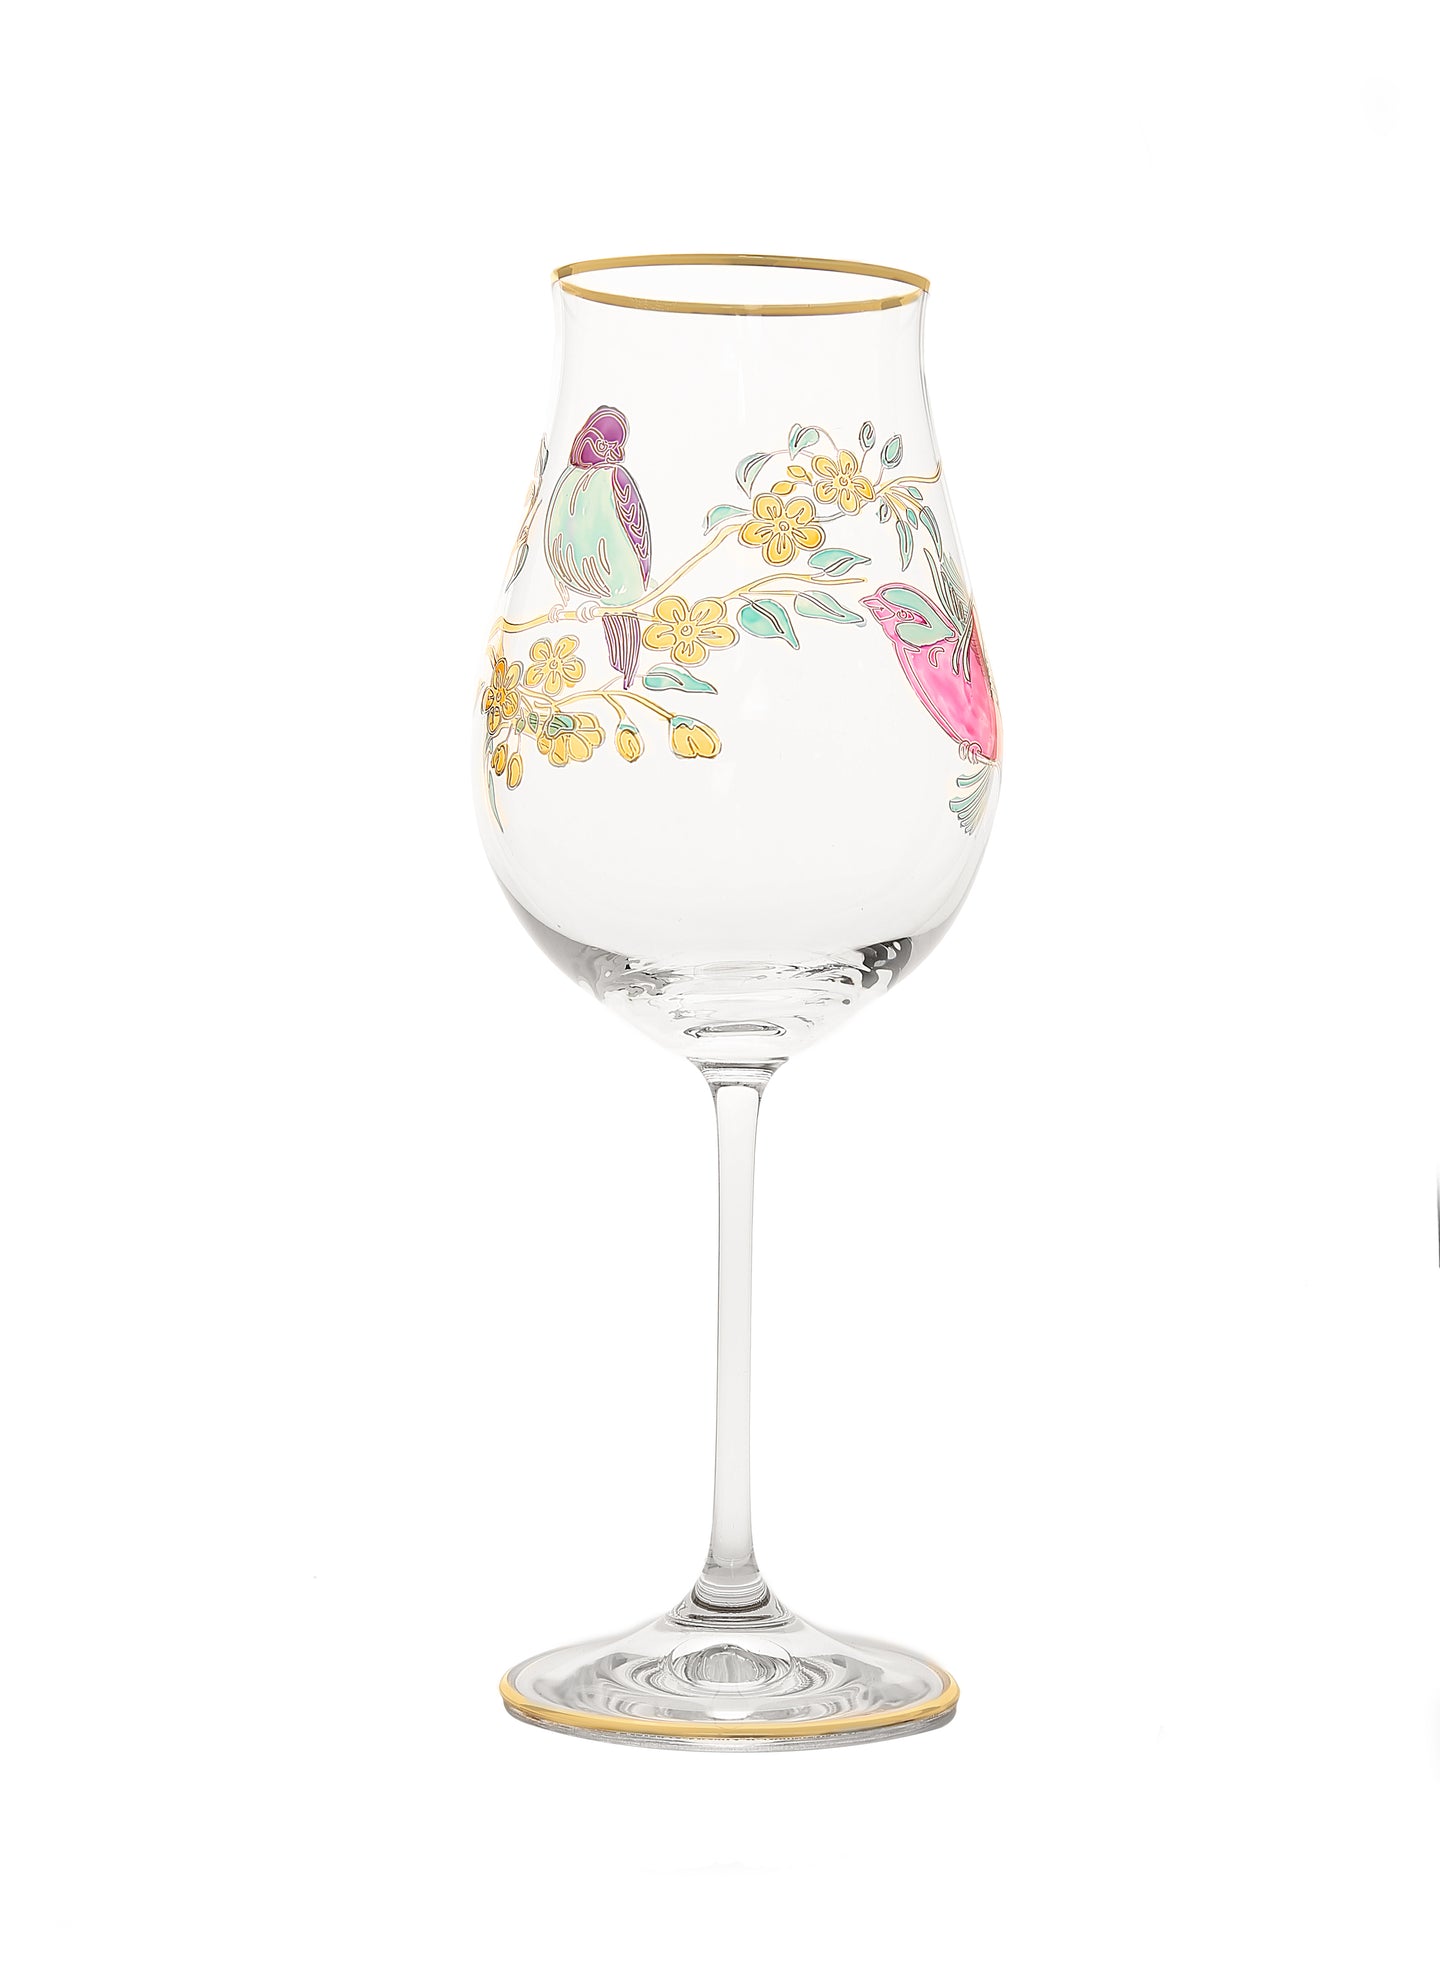 Set of 6 Wine Glasses with Painted Bird